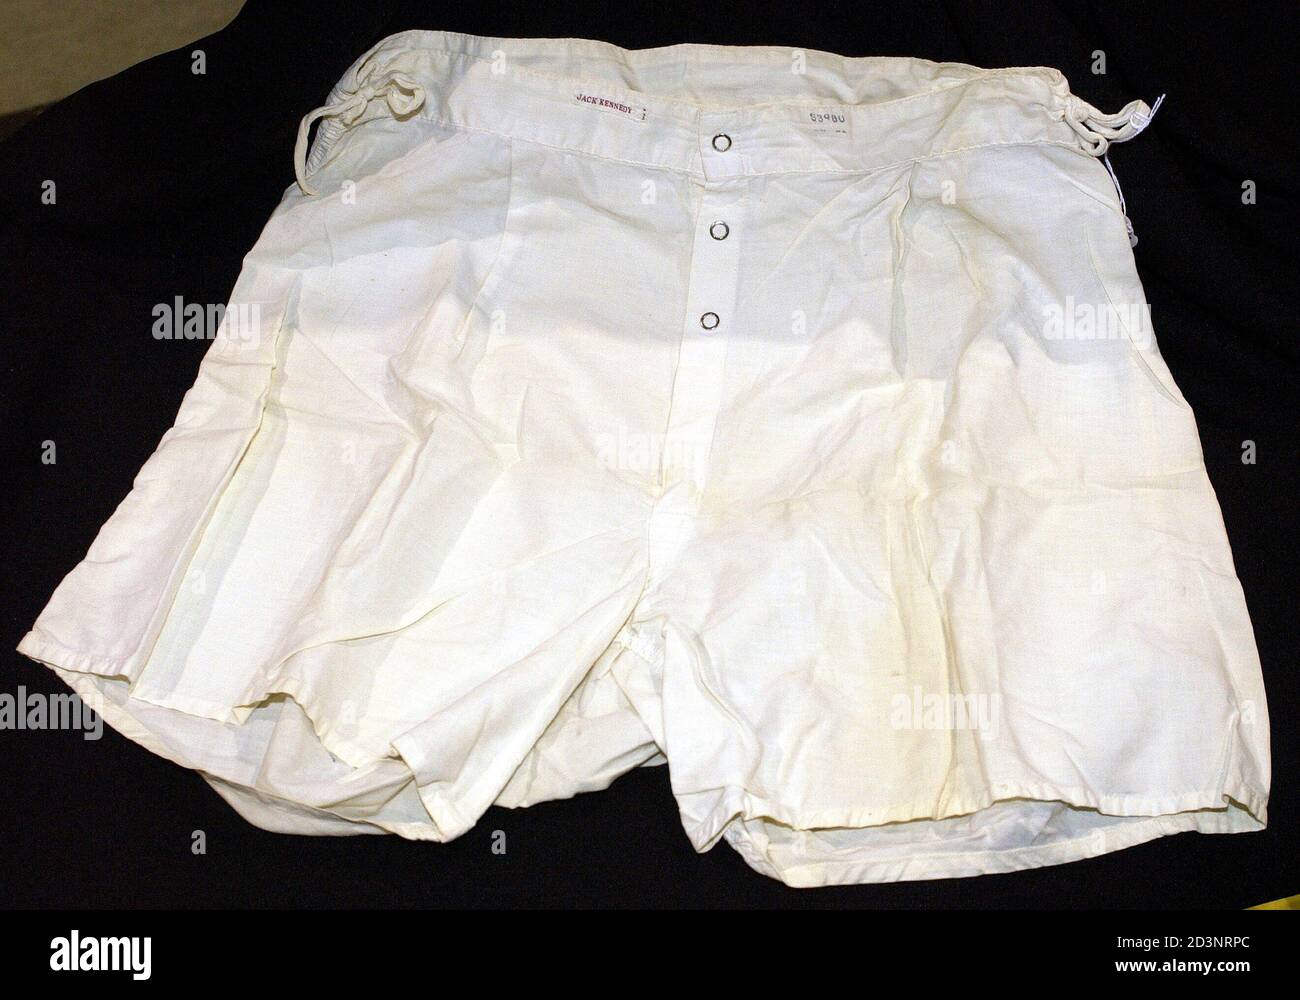 Boxer shorts belonging to late President John F. Kennedy on display as part of the items for auction belonging to the late president and first lady Jacqueline Kennedy on July 18, 2003. The auction, at Dawson's Auctioneers & Appraisers in Morris Plains, New Jersey, will include more than 300 items ranging from the whimsical, [World War IINavy-issue boxer shorts, with the sown label, 'Jack Kennedy', to the historic, a personal presidential campaign notebook.] Stock Photo